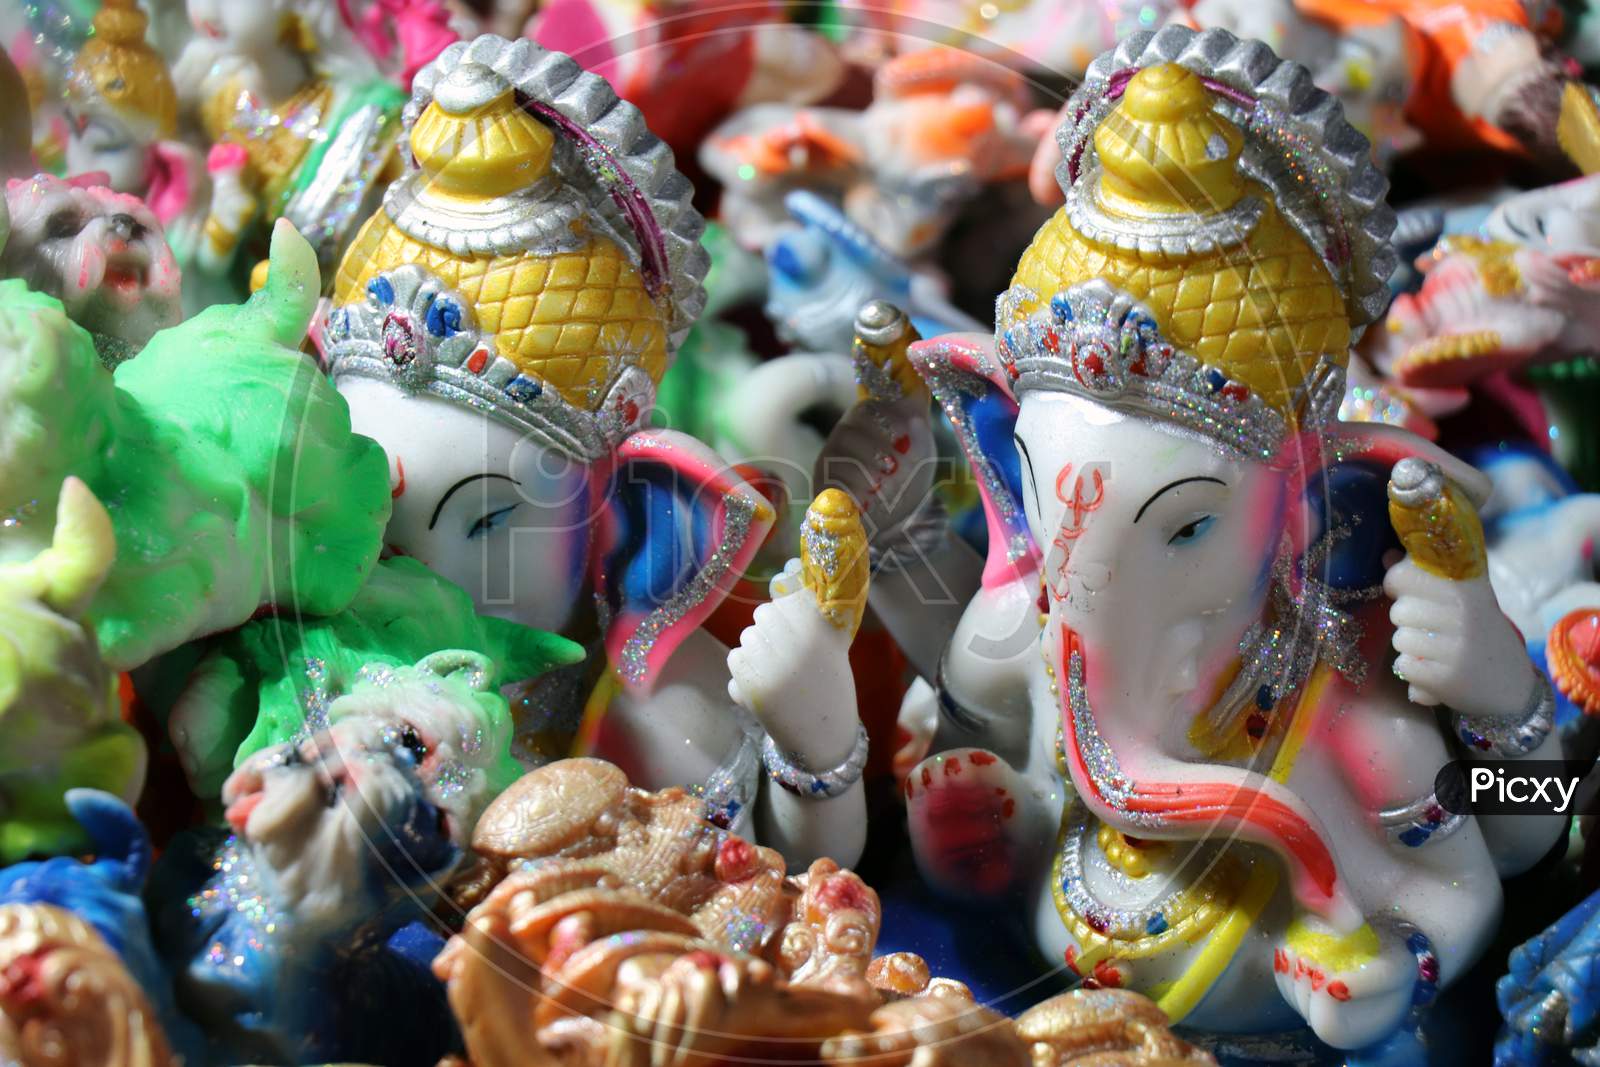 Selective Focus on Lord Ganesha Idol in a Store